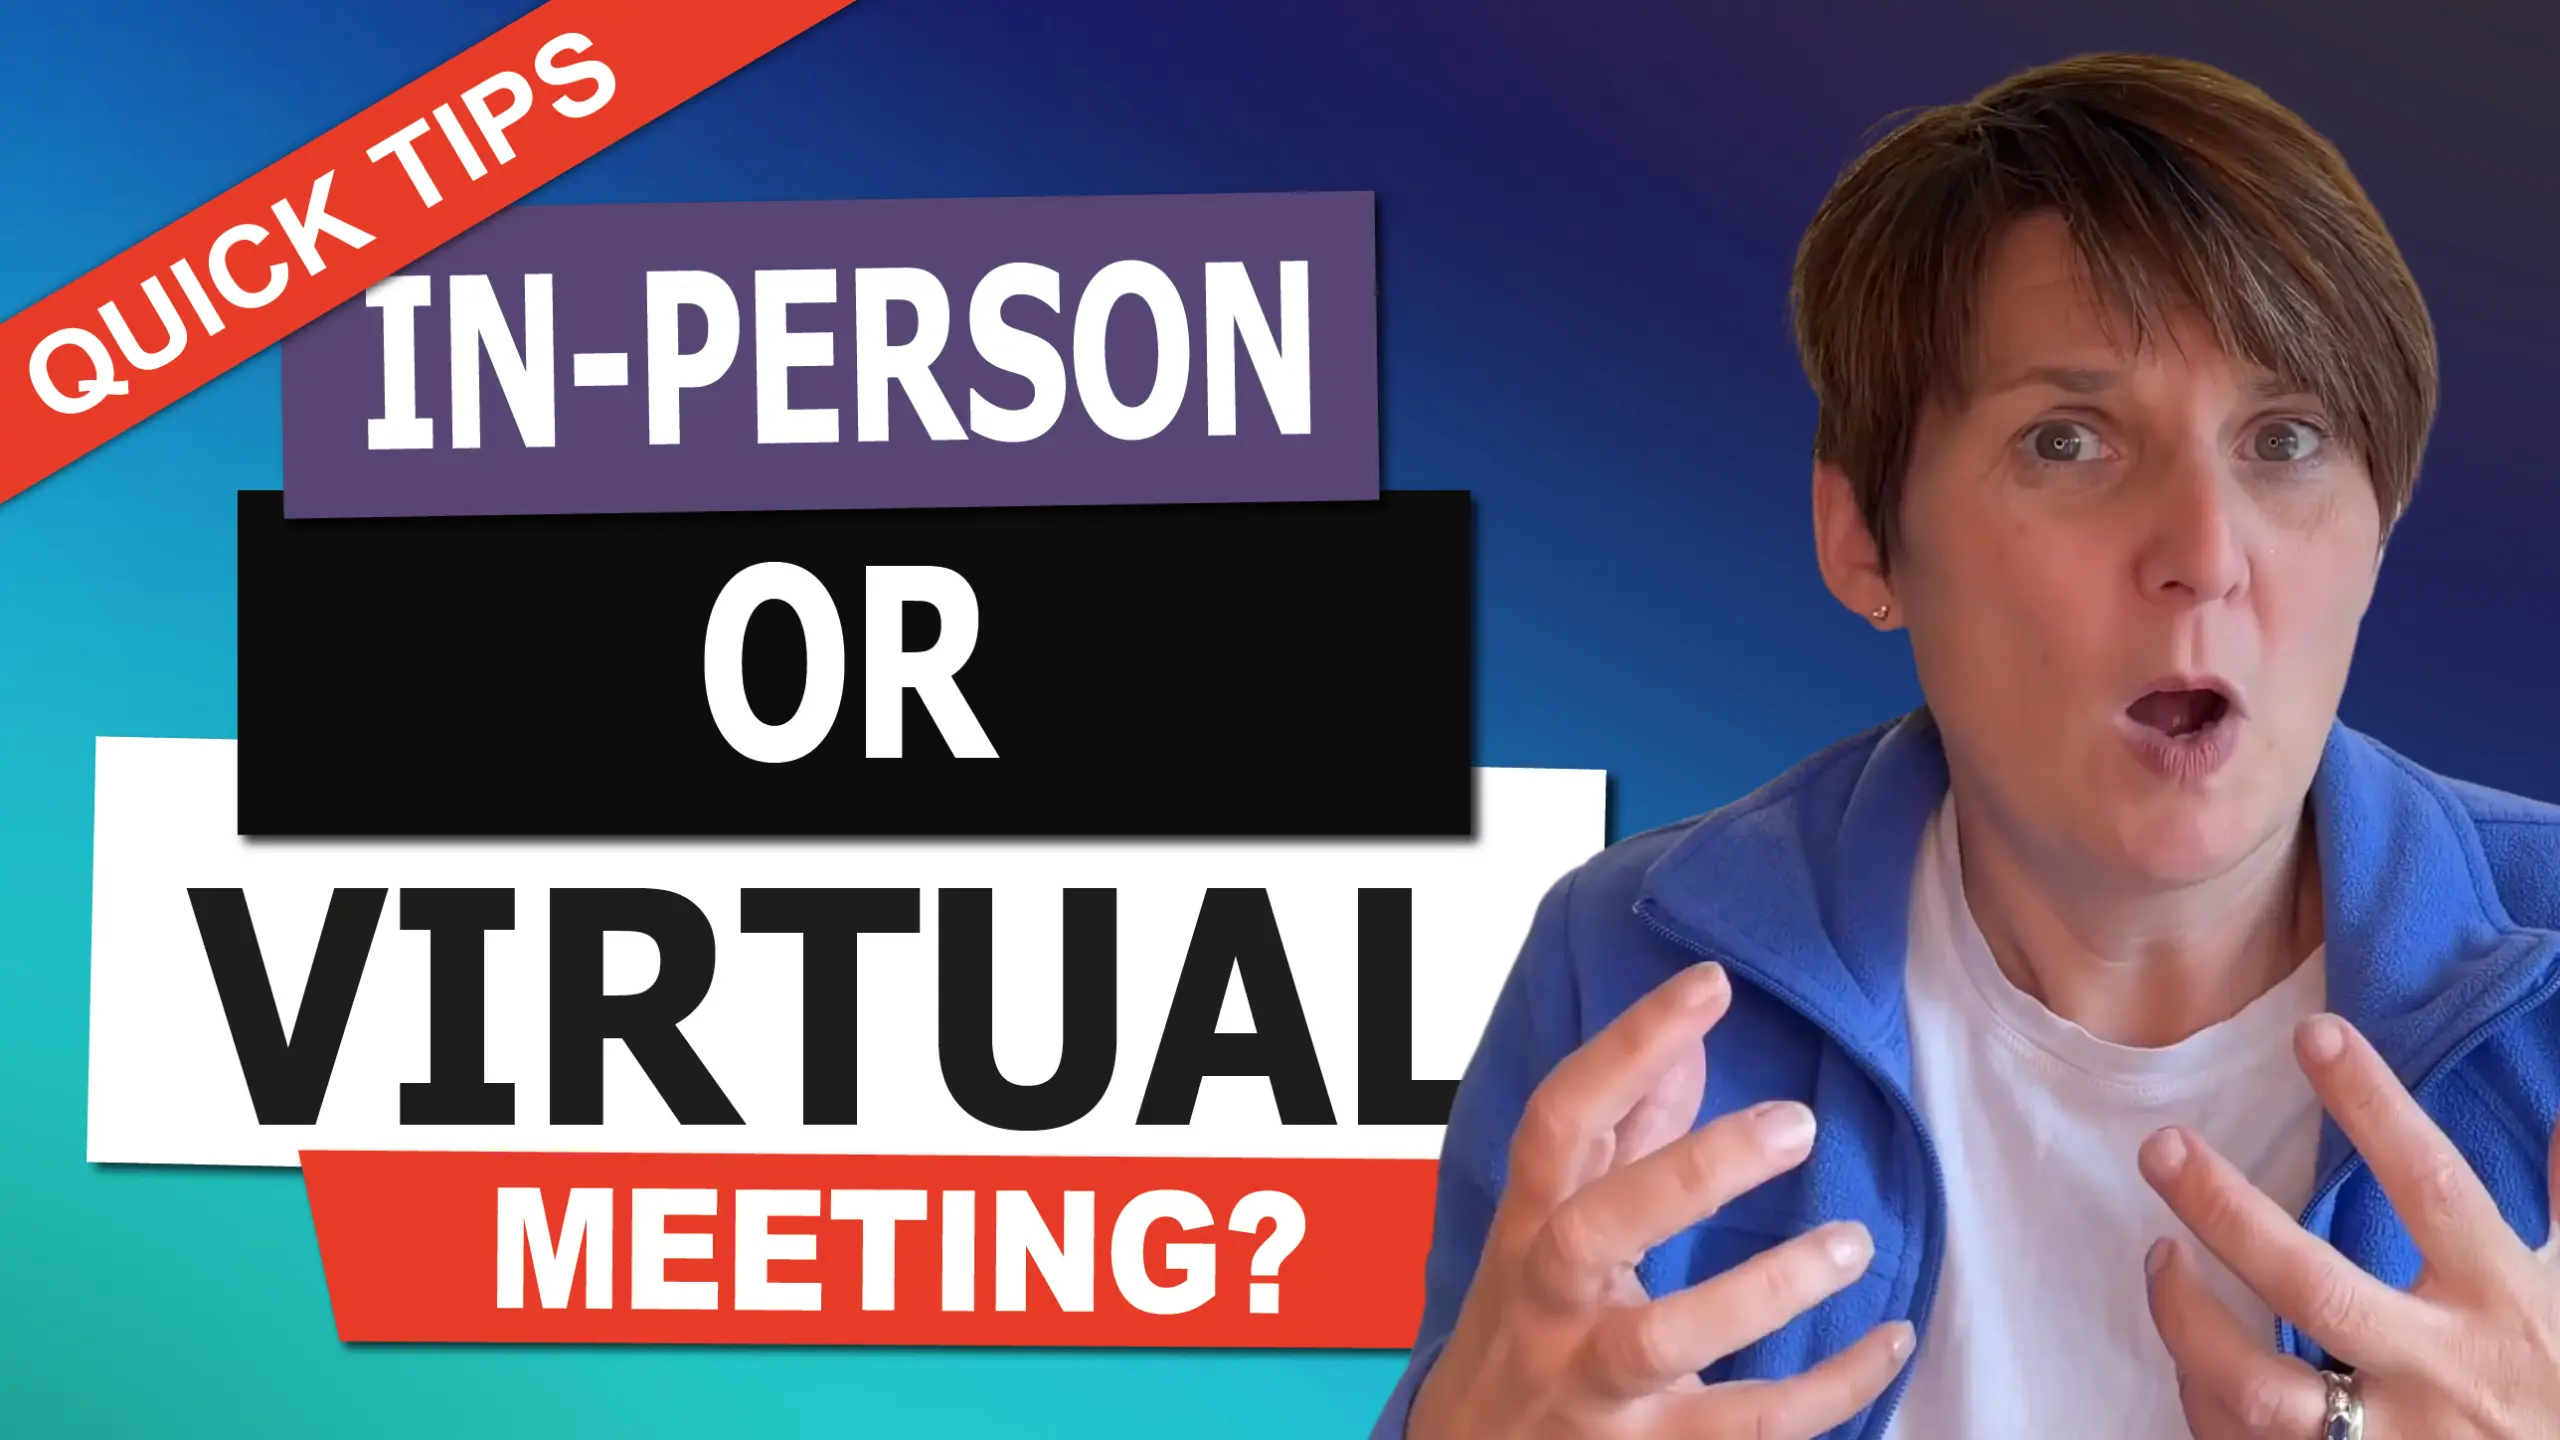 In-Person or Virtual Meeting? with Liane Davey